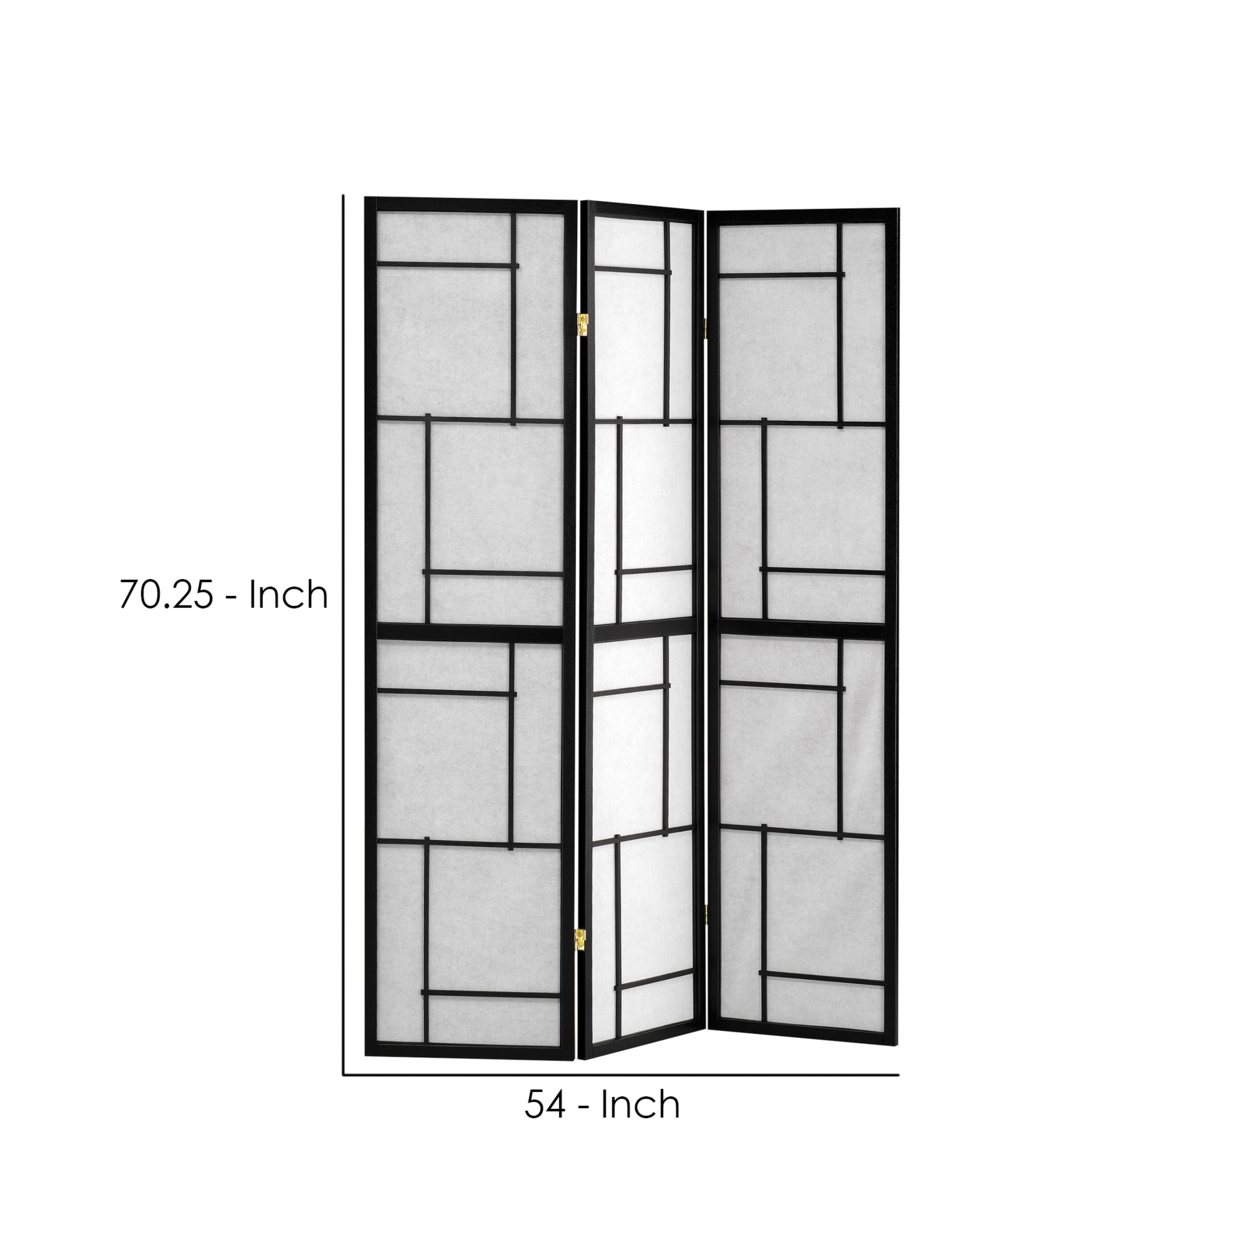 Monarch Specialties Damis 3-Panel Folding Floor Screen Black And White - image 5 of 5